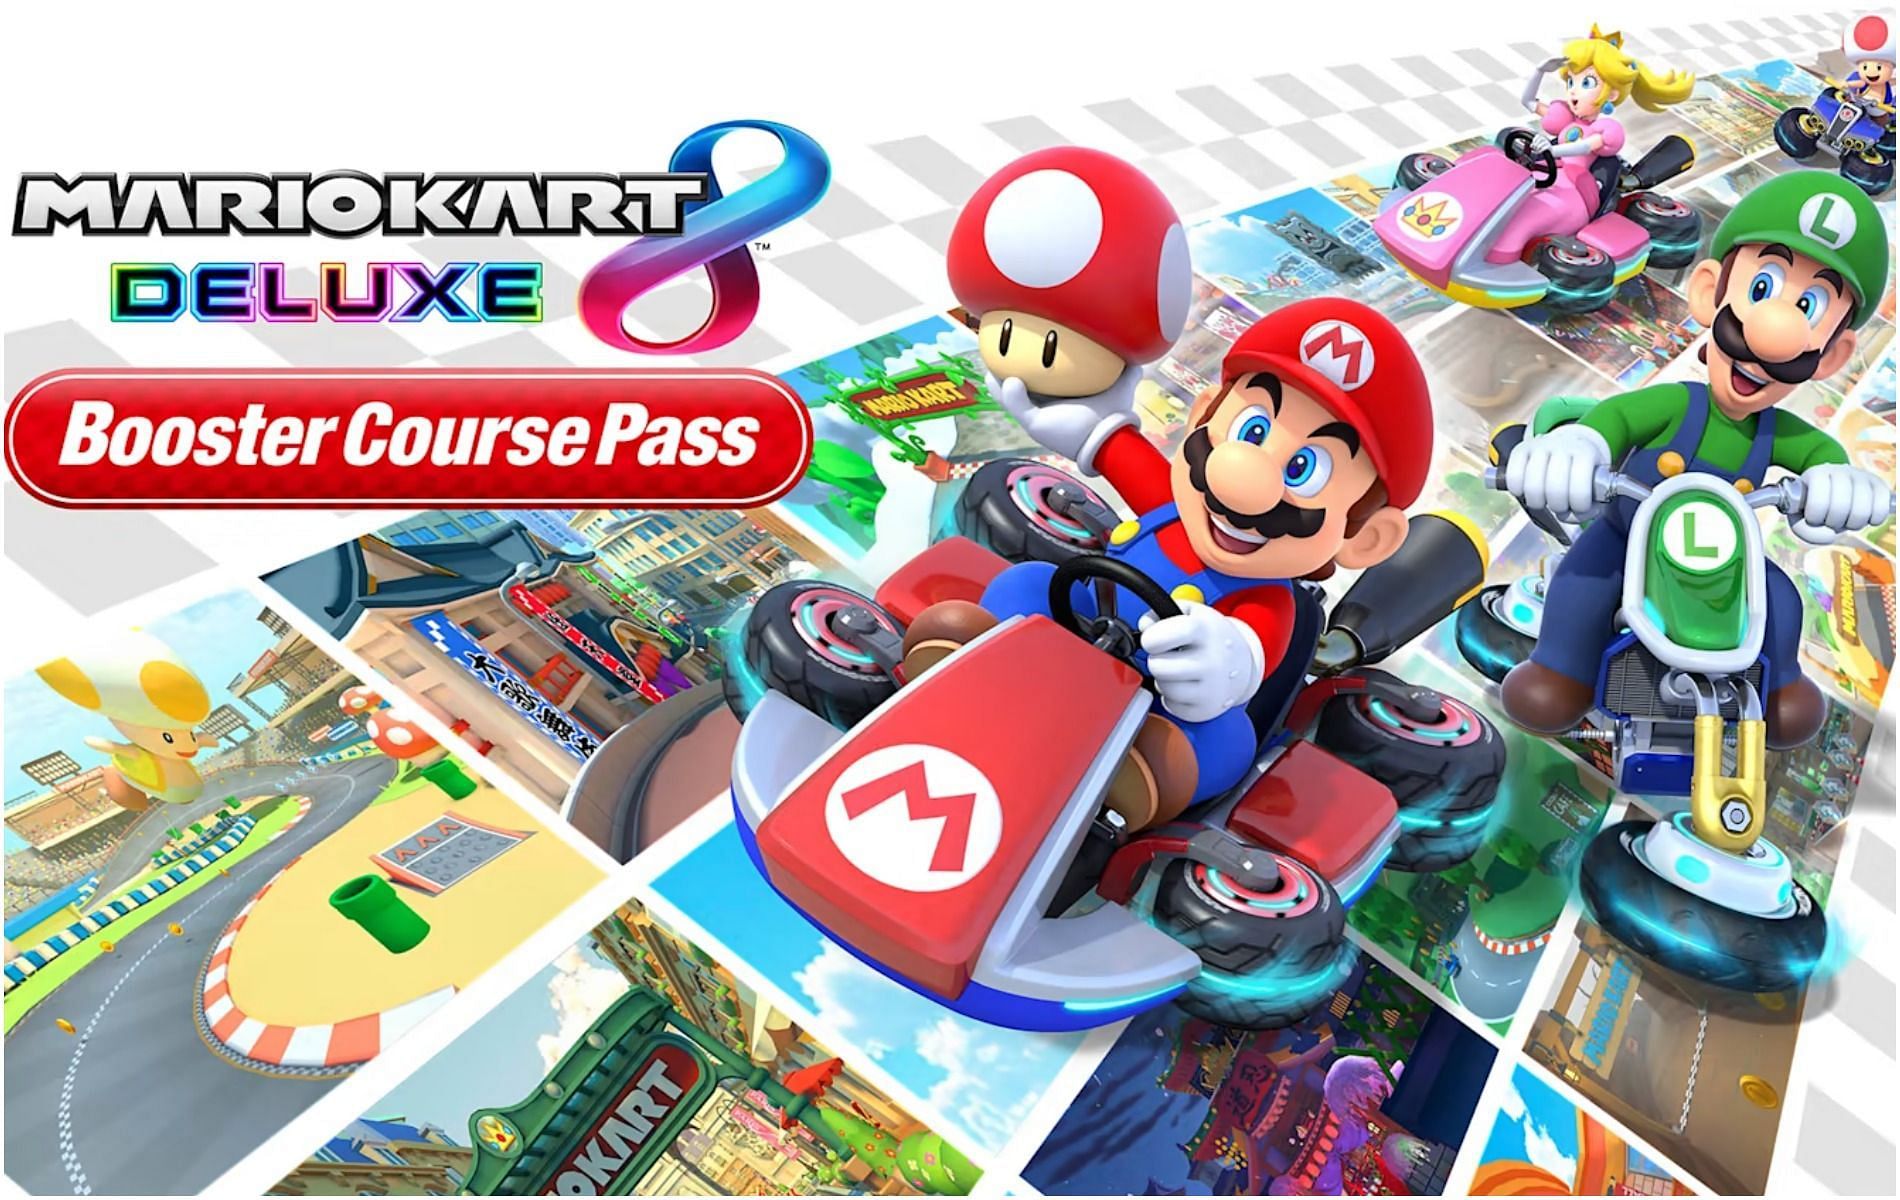 Mario Kart 8 Deluxe&#039;s DLC is coming, and here is what fans can expect (Image via Nintendo)